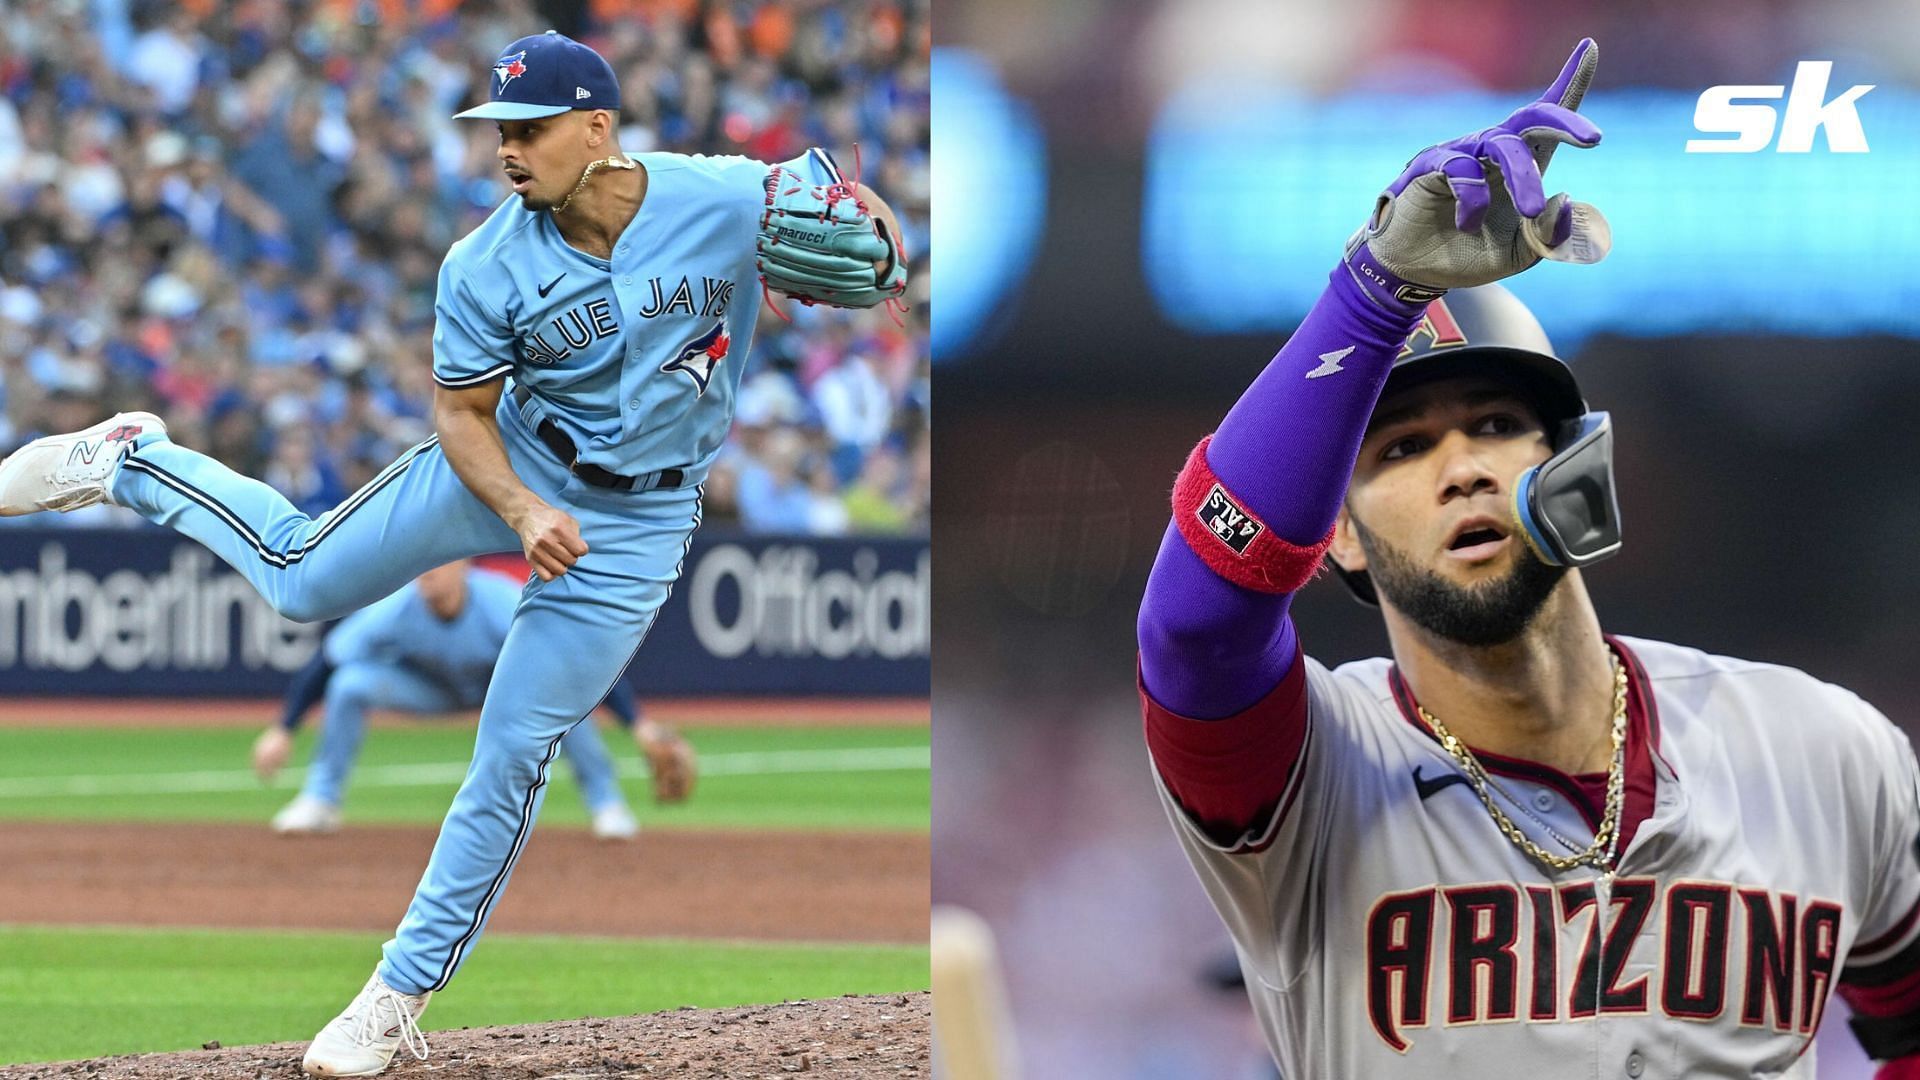 The Houston Astros could land a few notable free agents this offseason